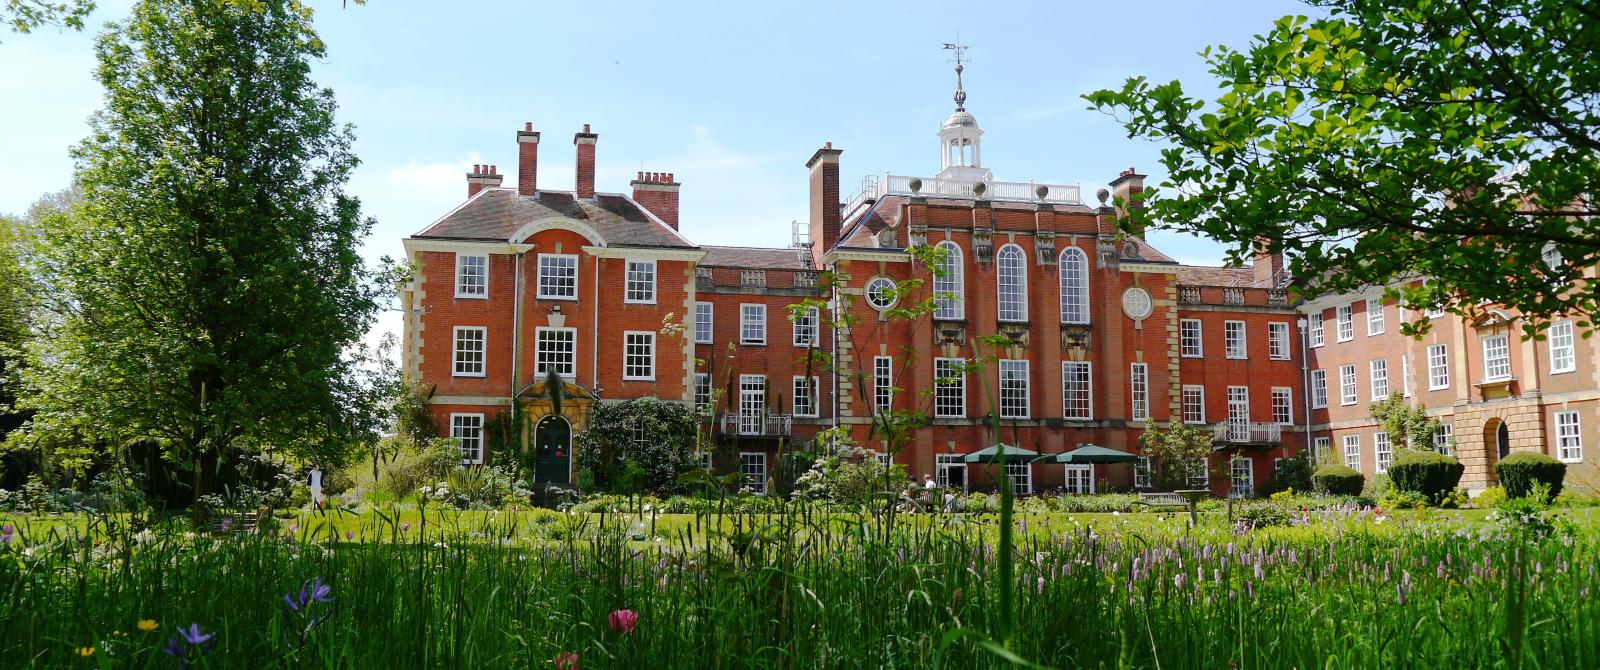 View of College Bar and gardens in the summer